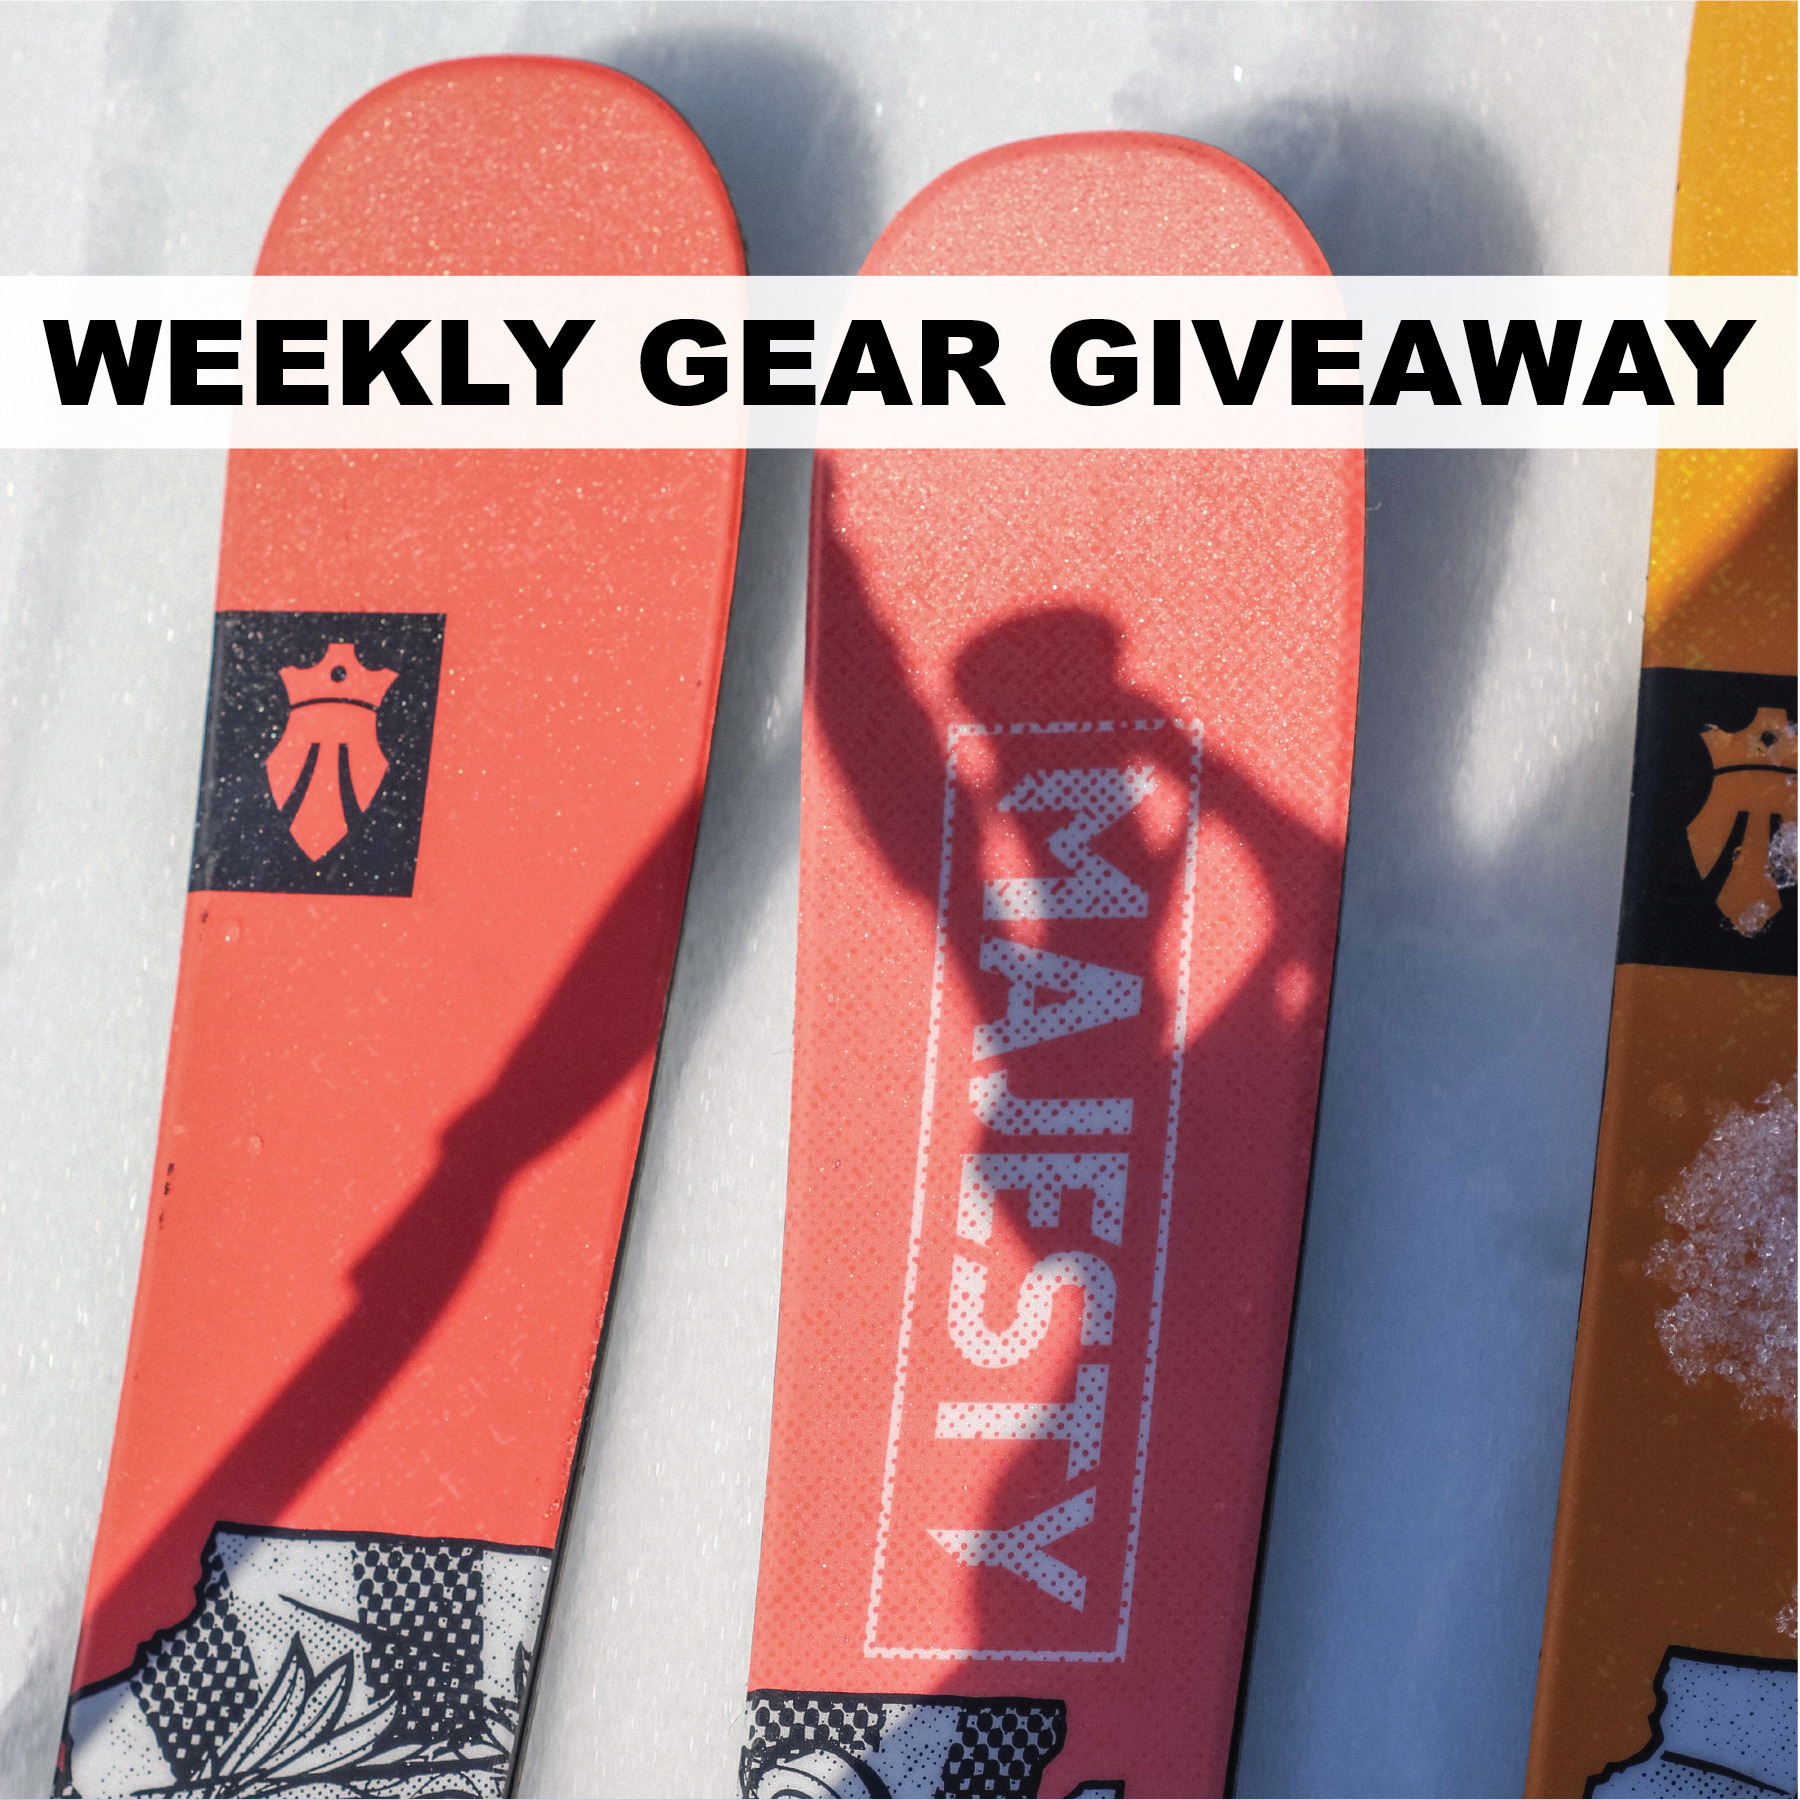 Win Skis from Majesty, BLISTER